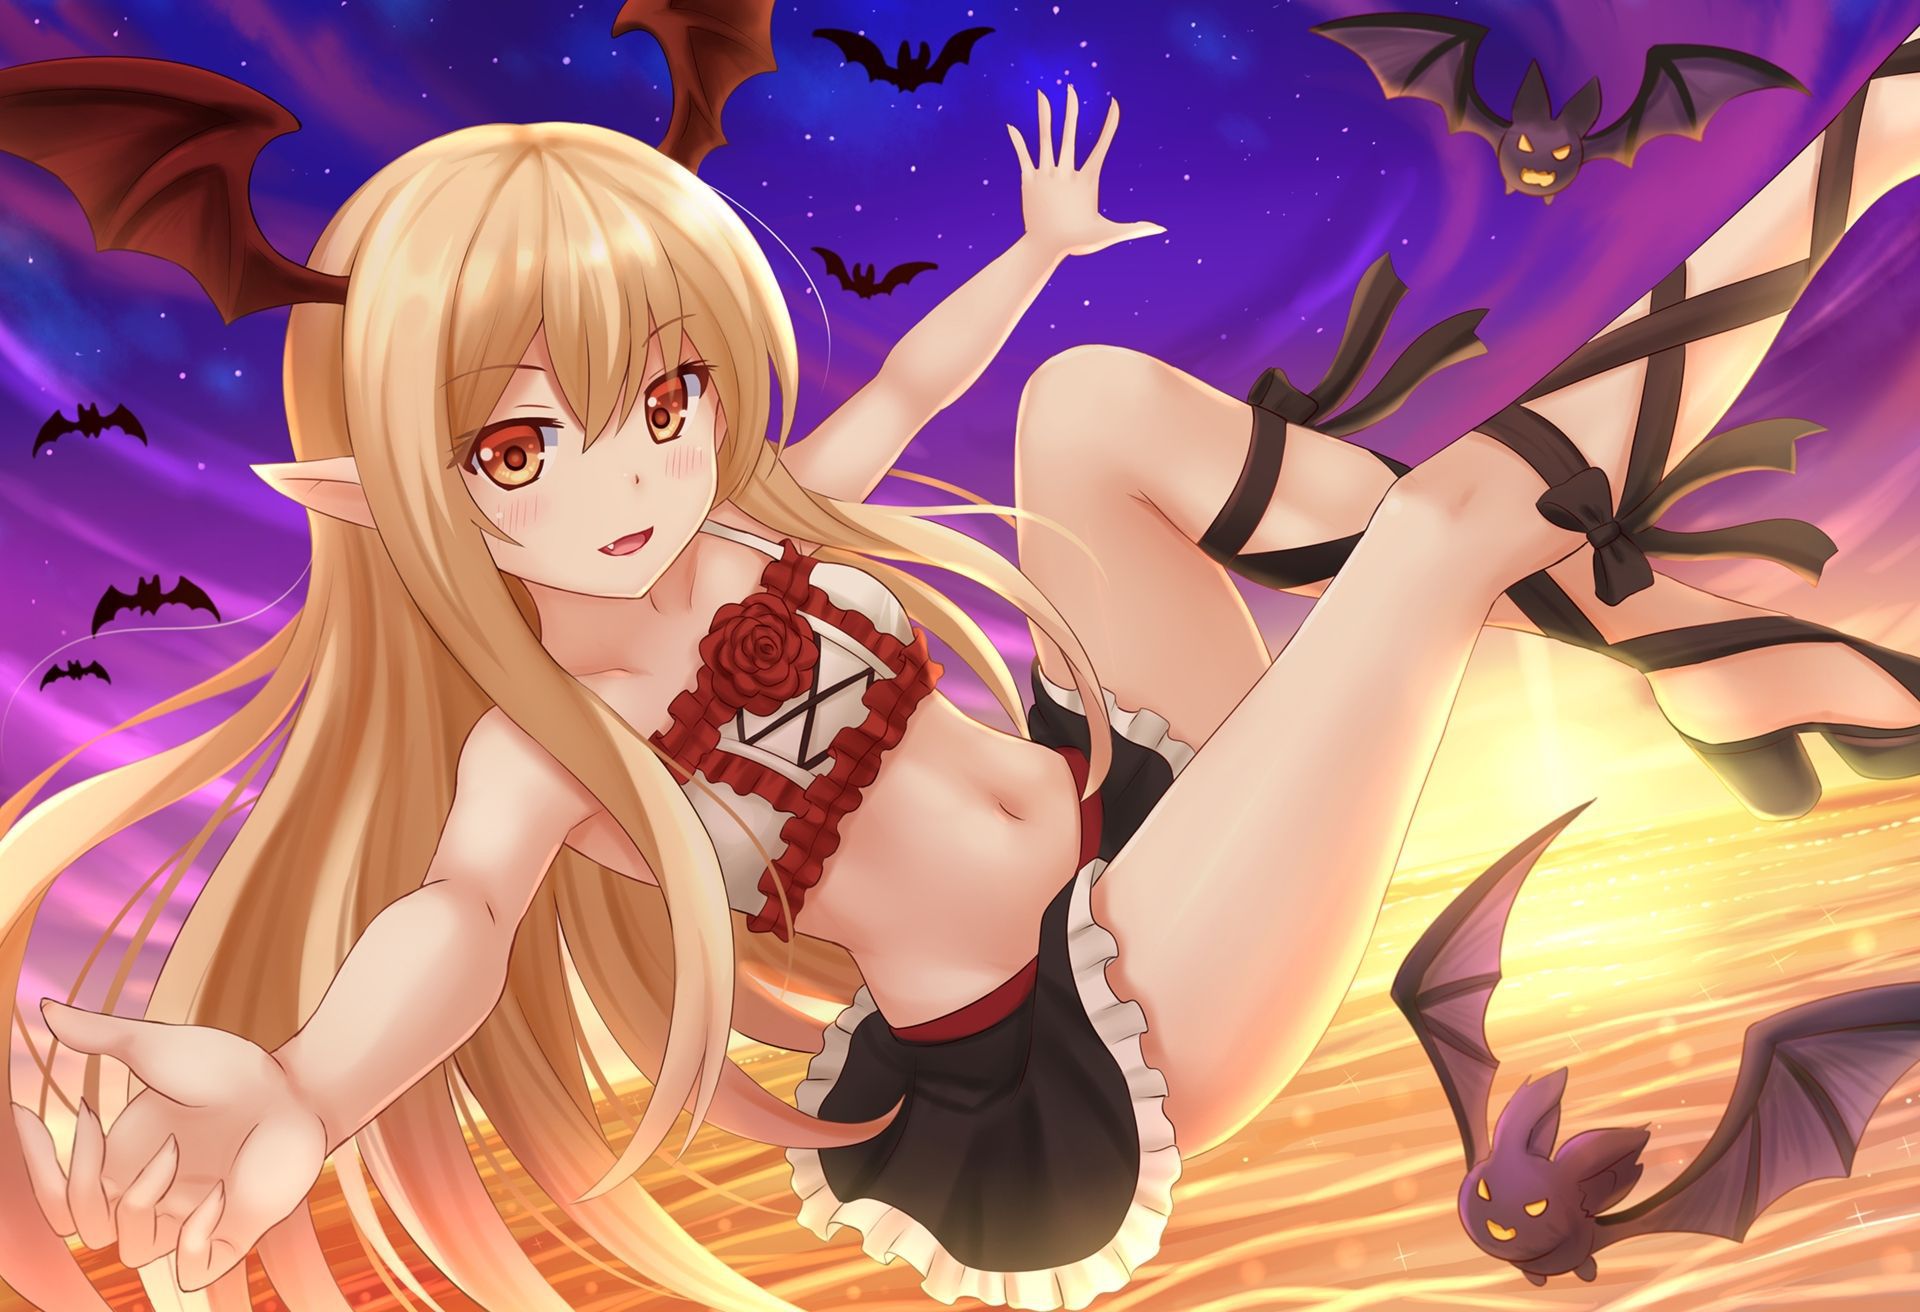 Vampy Chan (secondary-ZIP) to put on the shoes and cute images together "of God bahamut and grumble fantasy." 44